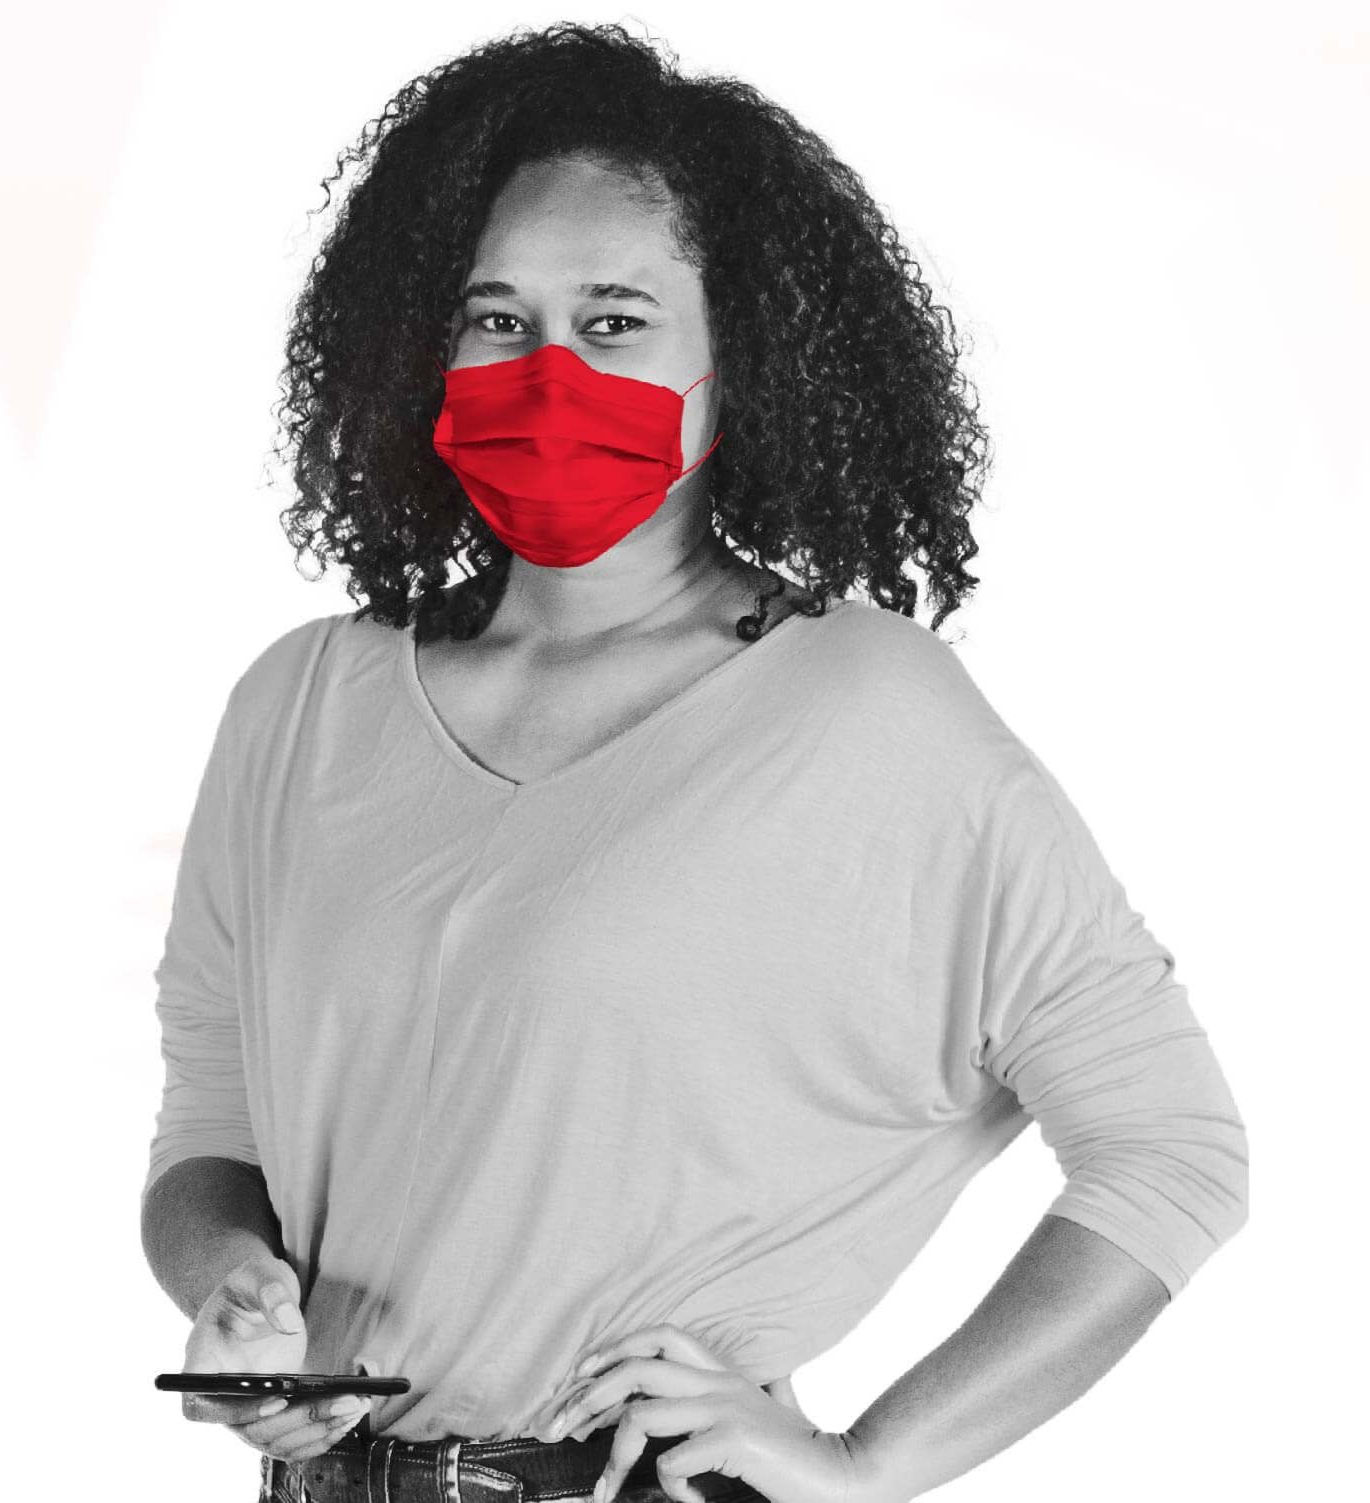 A woman holding a phone, wearing a red face mask